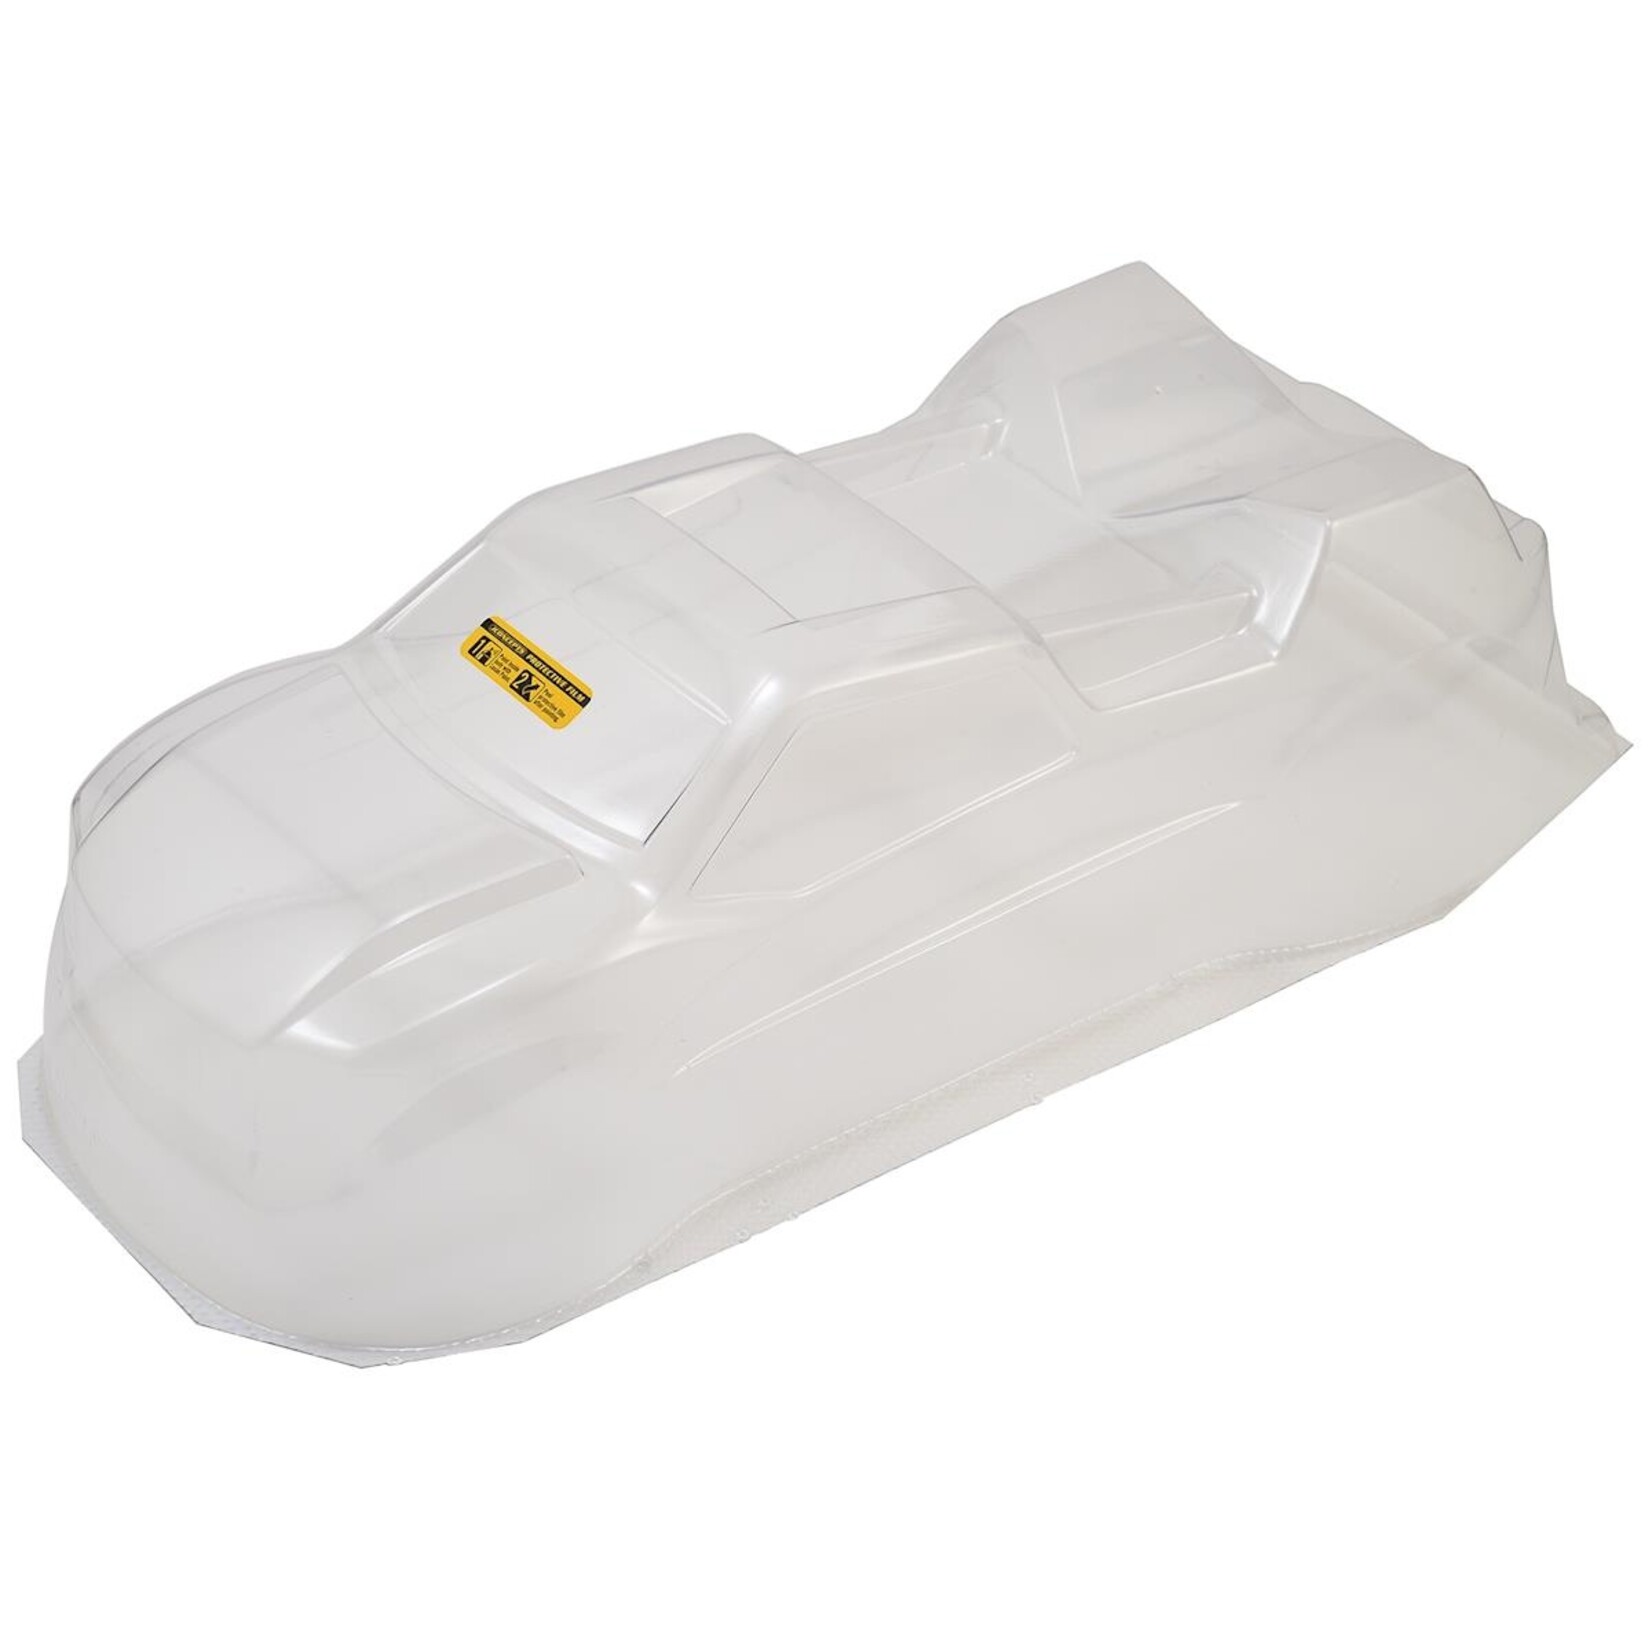 JConcepts JConcepts 22T 4.0 "Finnisher" Body (Clear) #0367